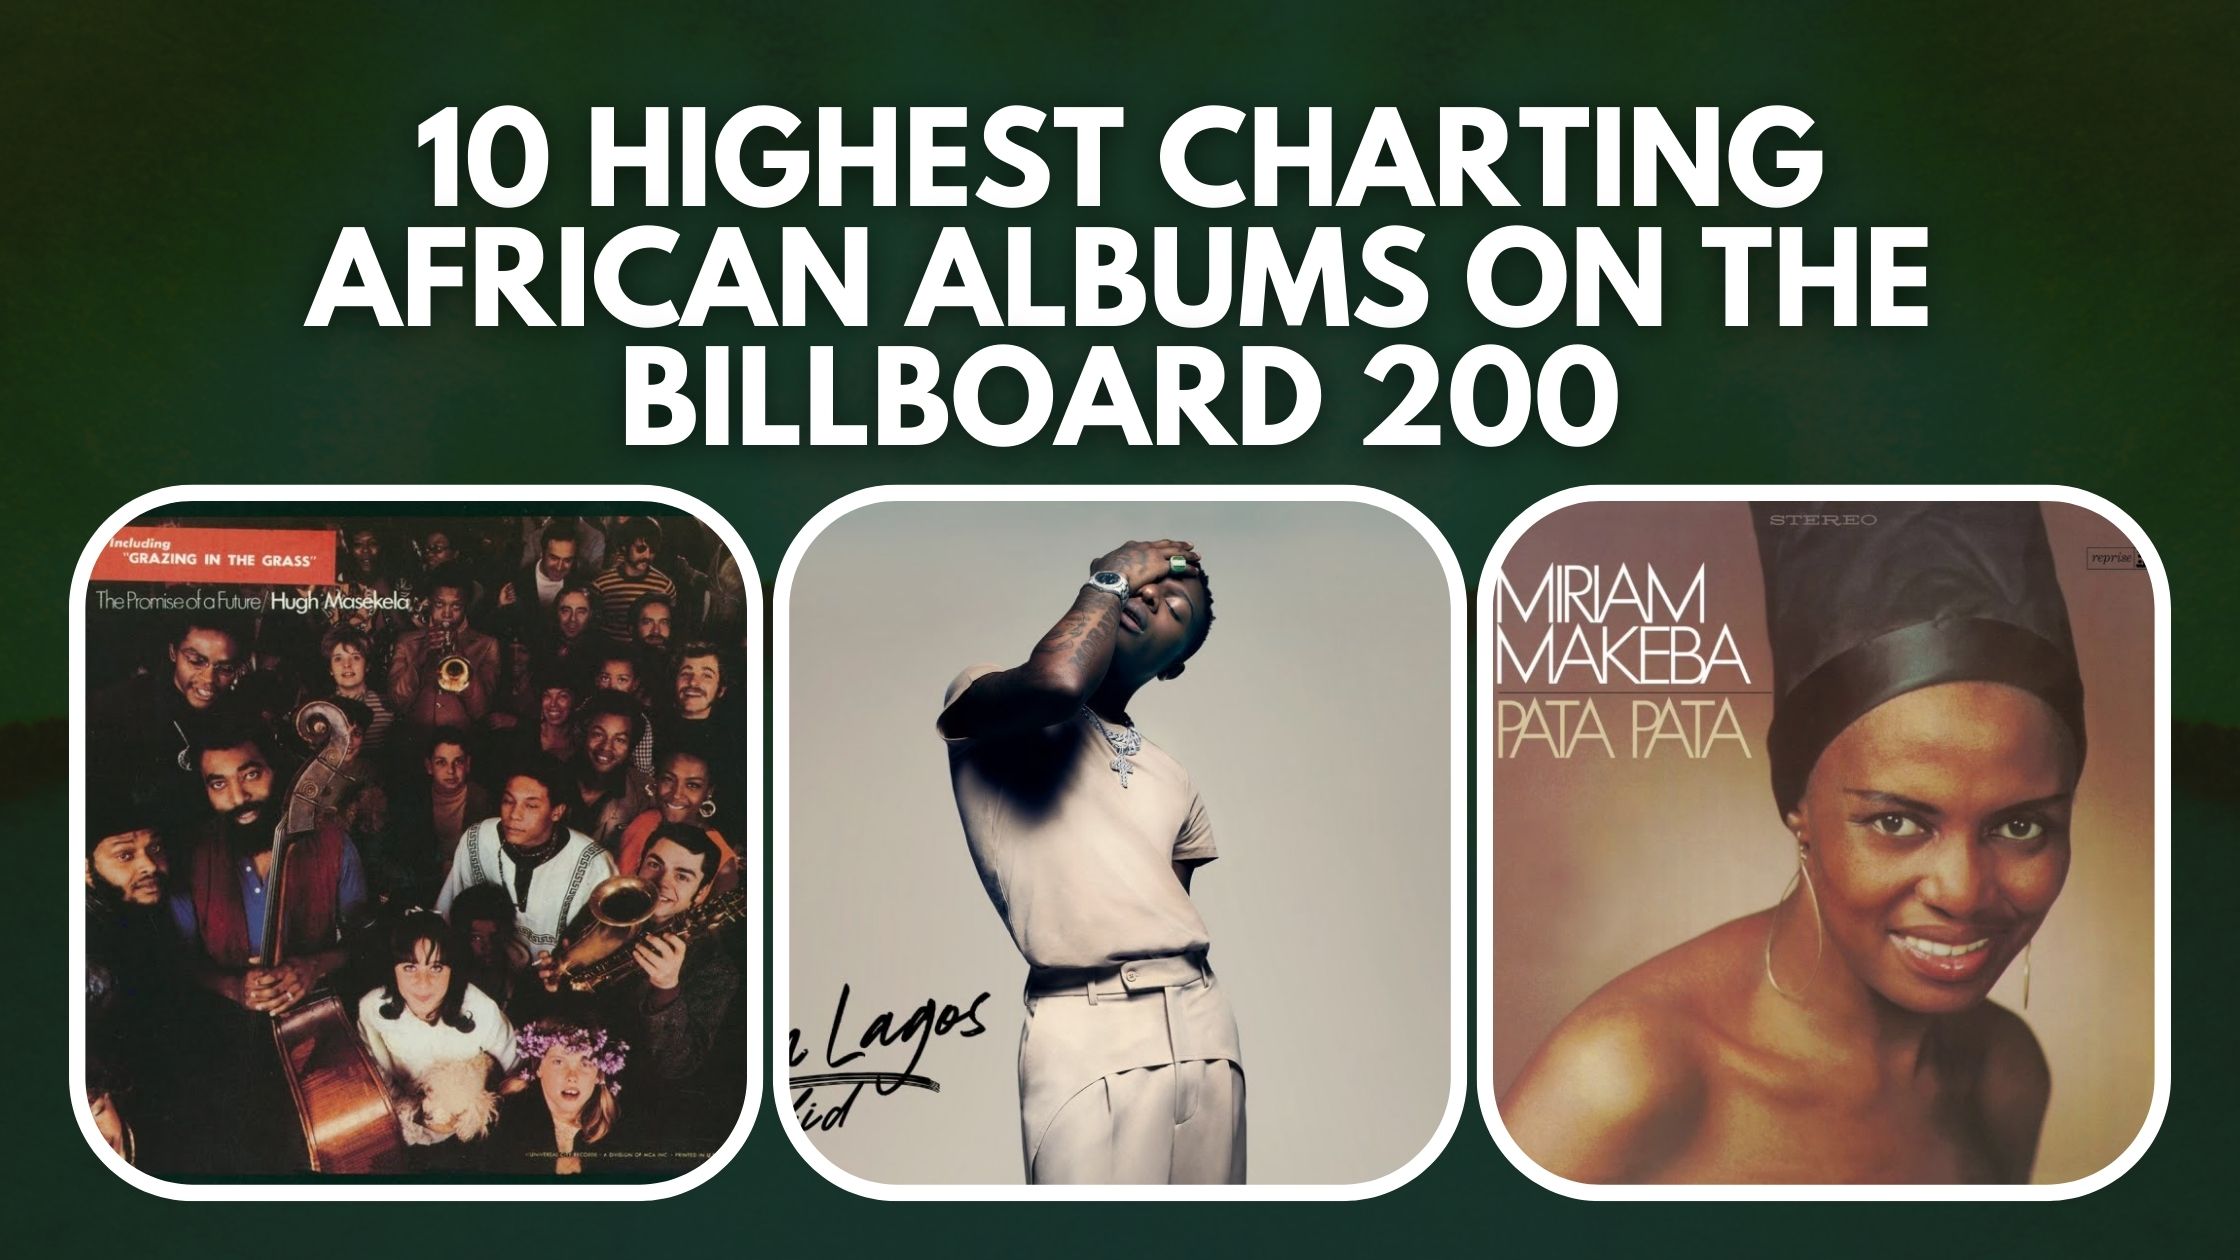 10 Highest Charting African Albums on the Billboard 200